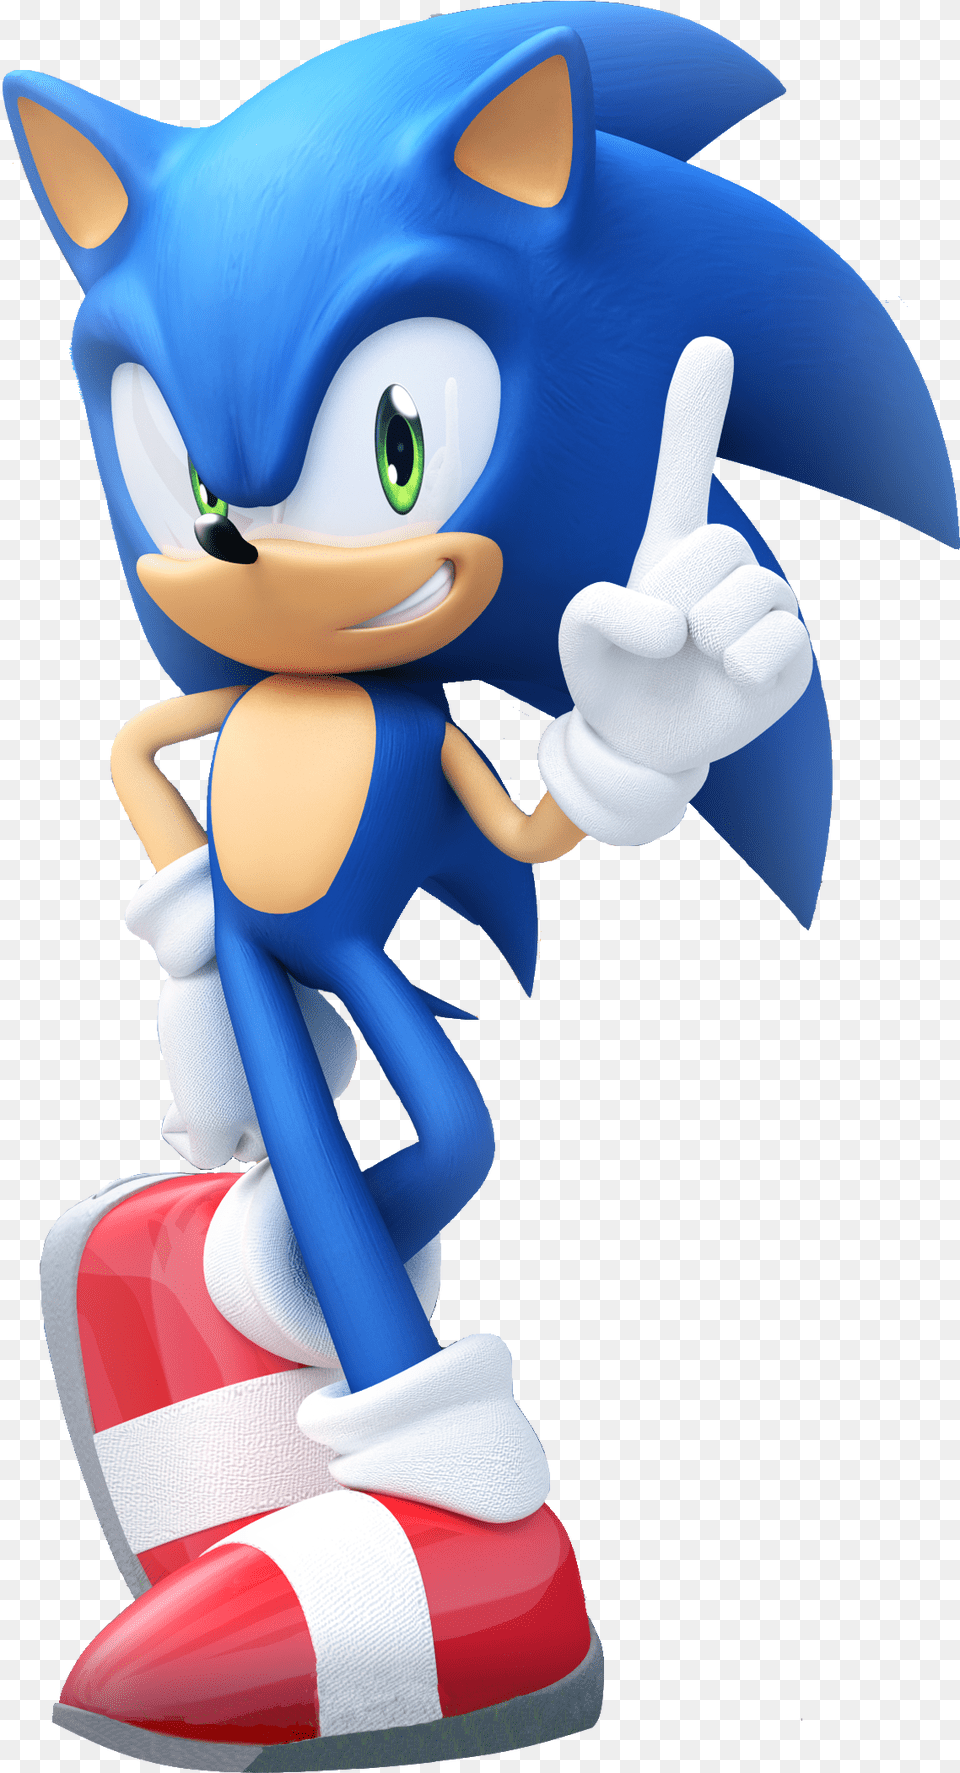 Sonic The Hedgehog Sonic The Hedgehog Clothing, Glove, Toy, Figurine Free Transparent Png